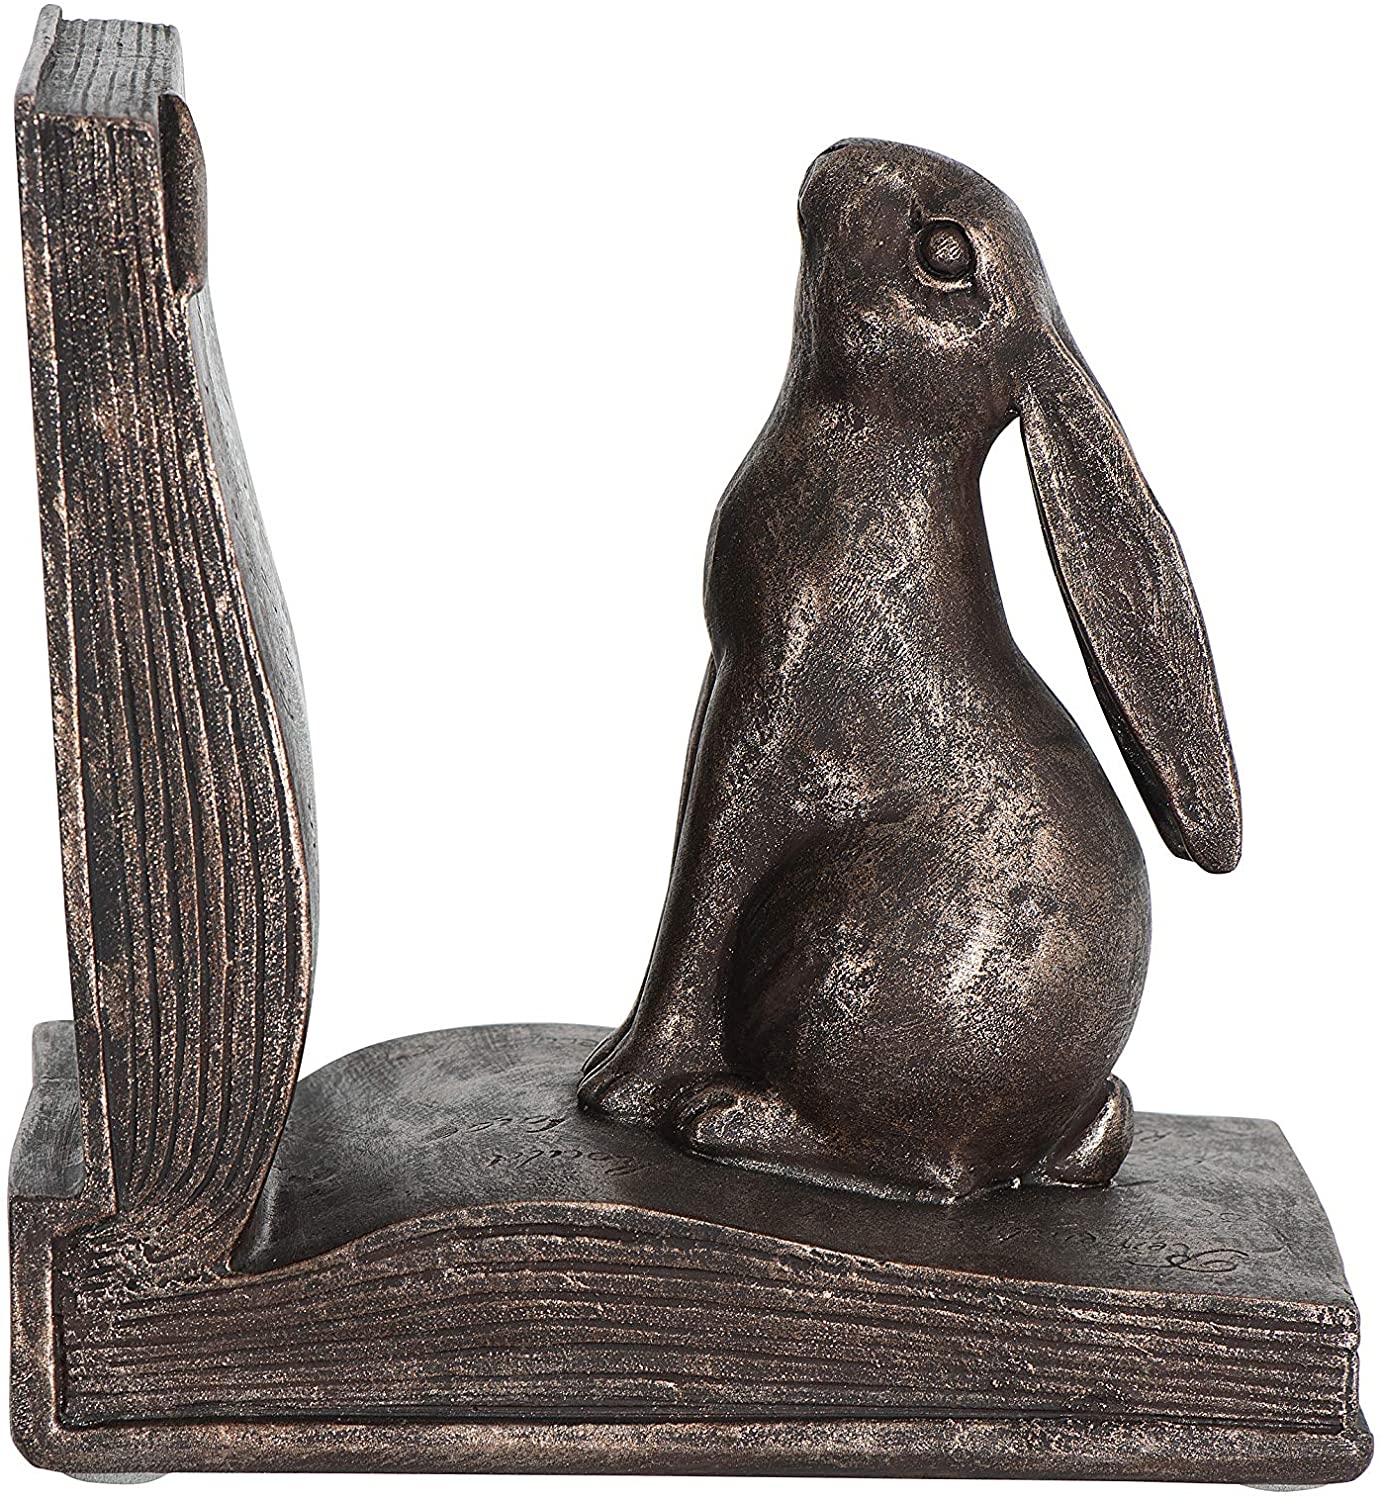 Rustic Bronze Rabbit on Book Resin Bookends (Set of 2 Pieces) - Image 1